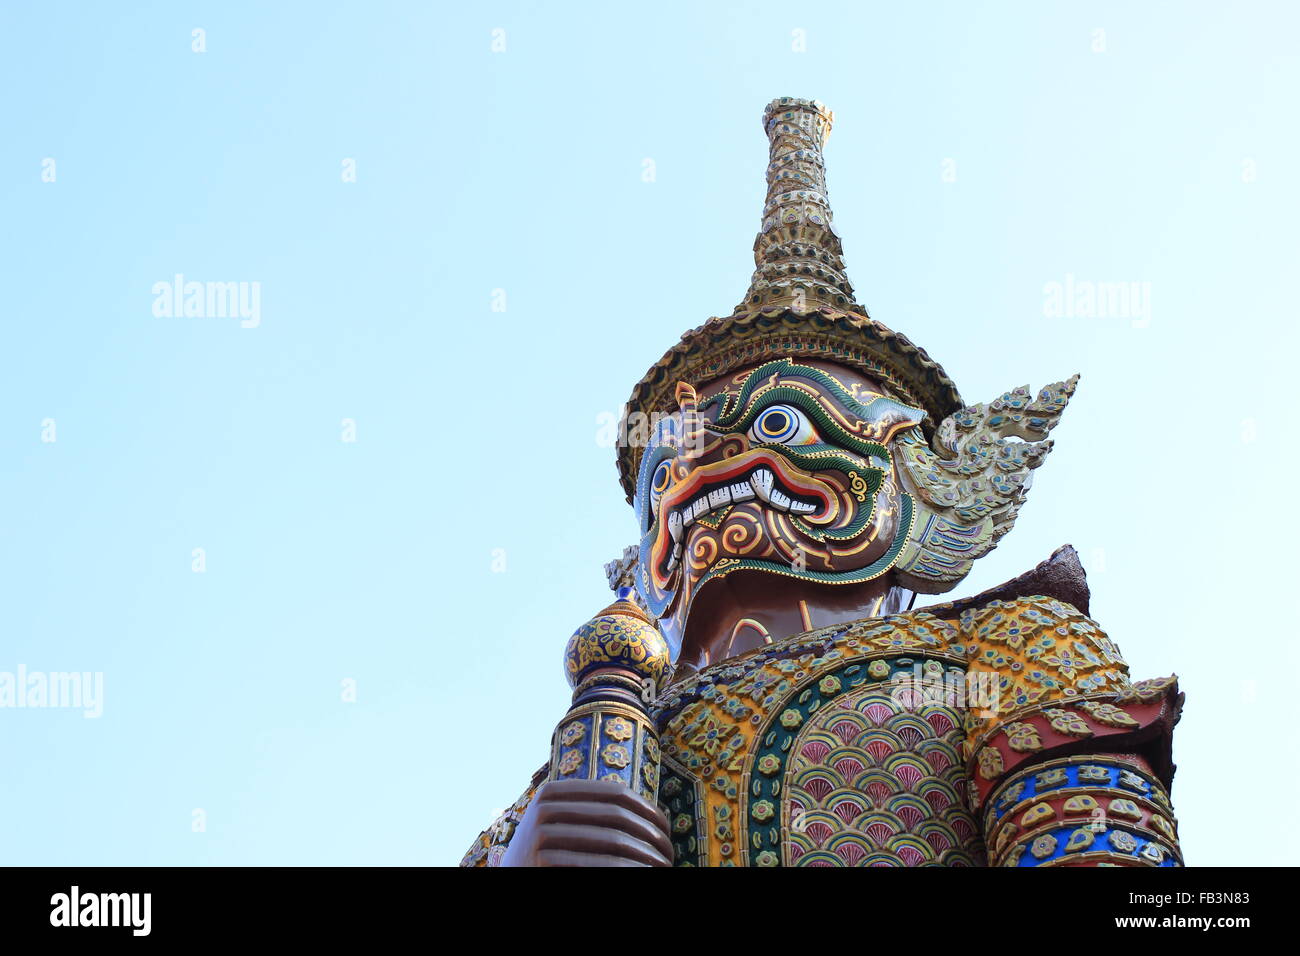 Background of Giant Statue at The Emerald Buddha Temple Stock Photo